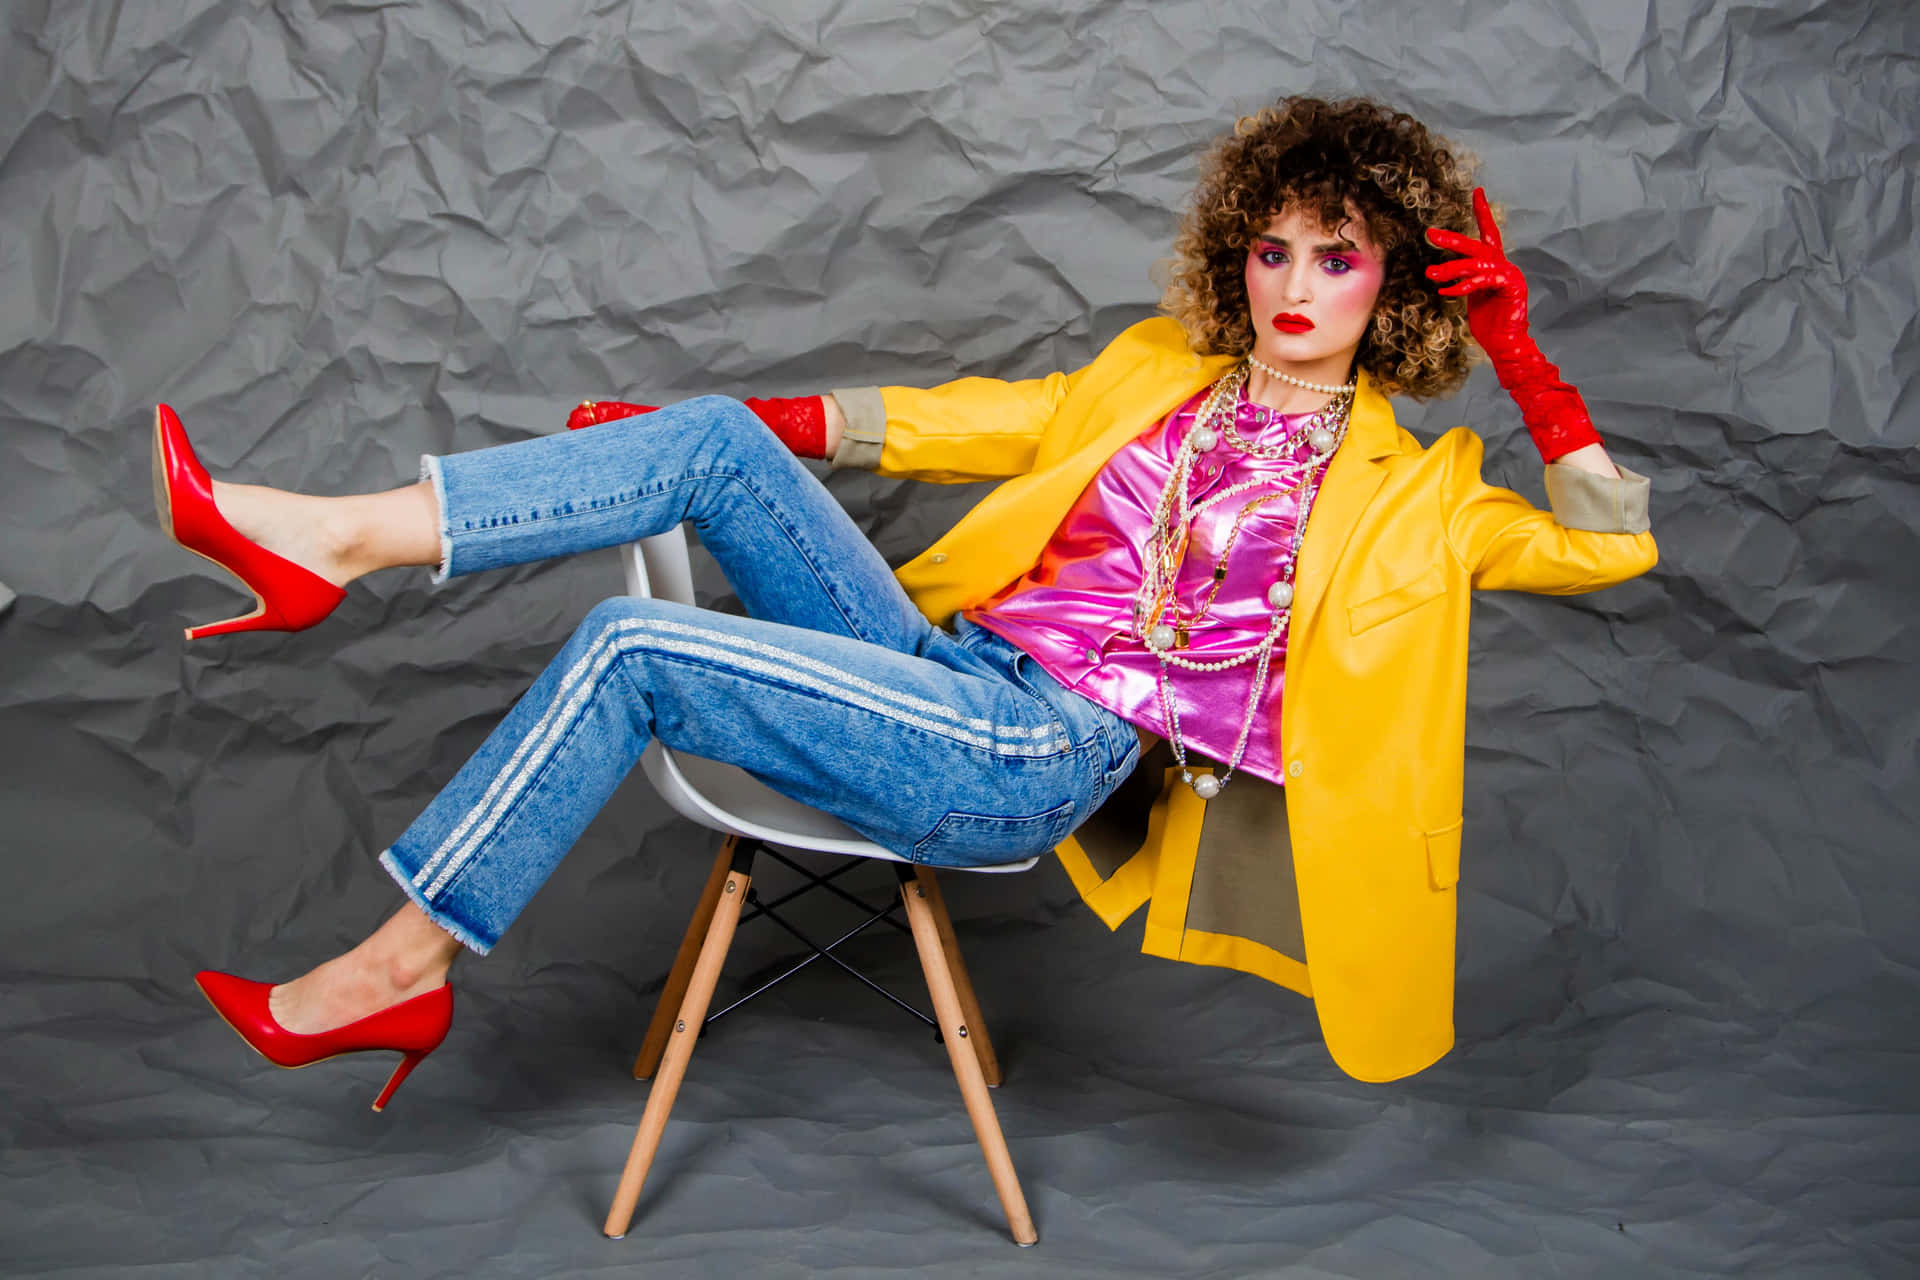 A Woman In A Yellow Jacket And Red Heels Is Sitting On A Chair